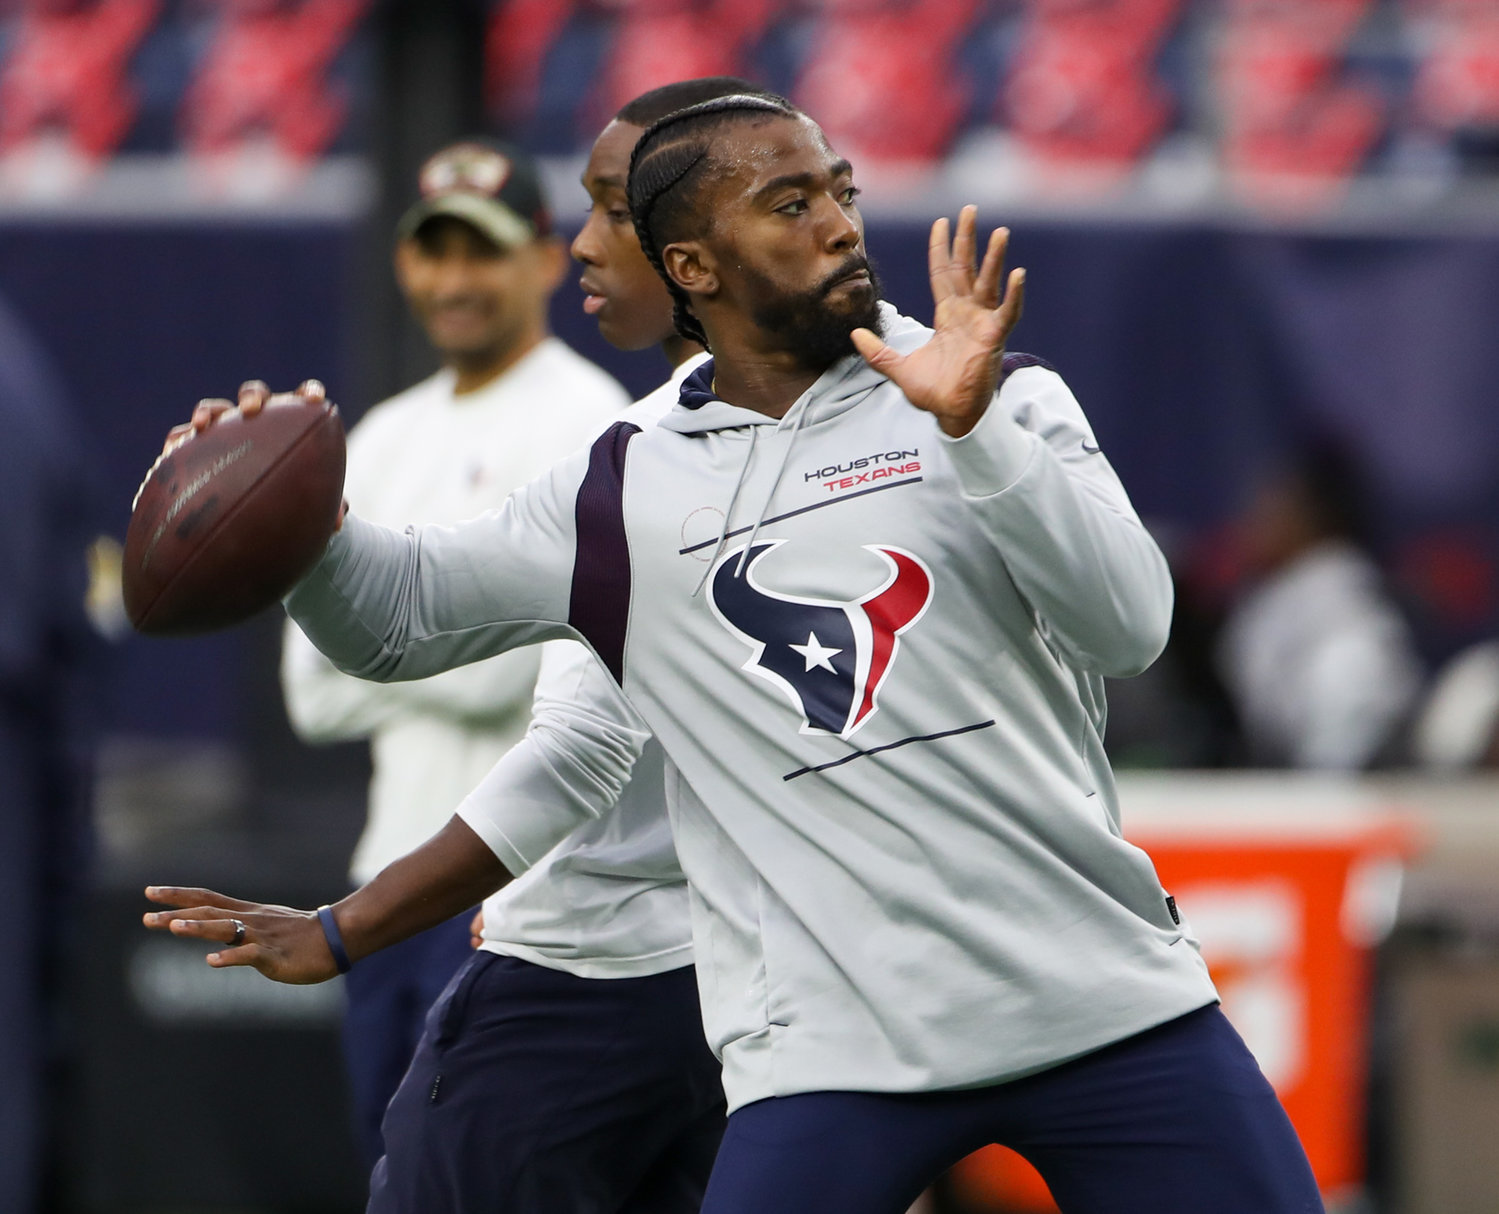 Houston Texans quarterback Tyrod Taylor (5) throws the ball during warmups before the start of an NFL game between the Houston Texans and the New York Jets on November 28, 2021 in Houston, Texas.